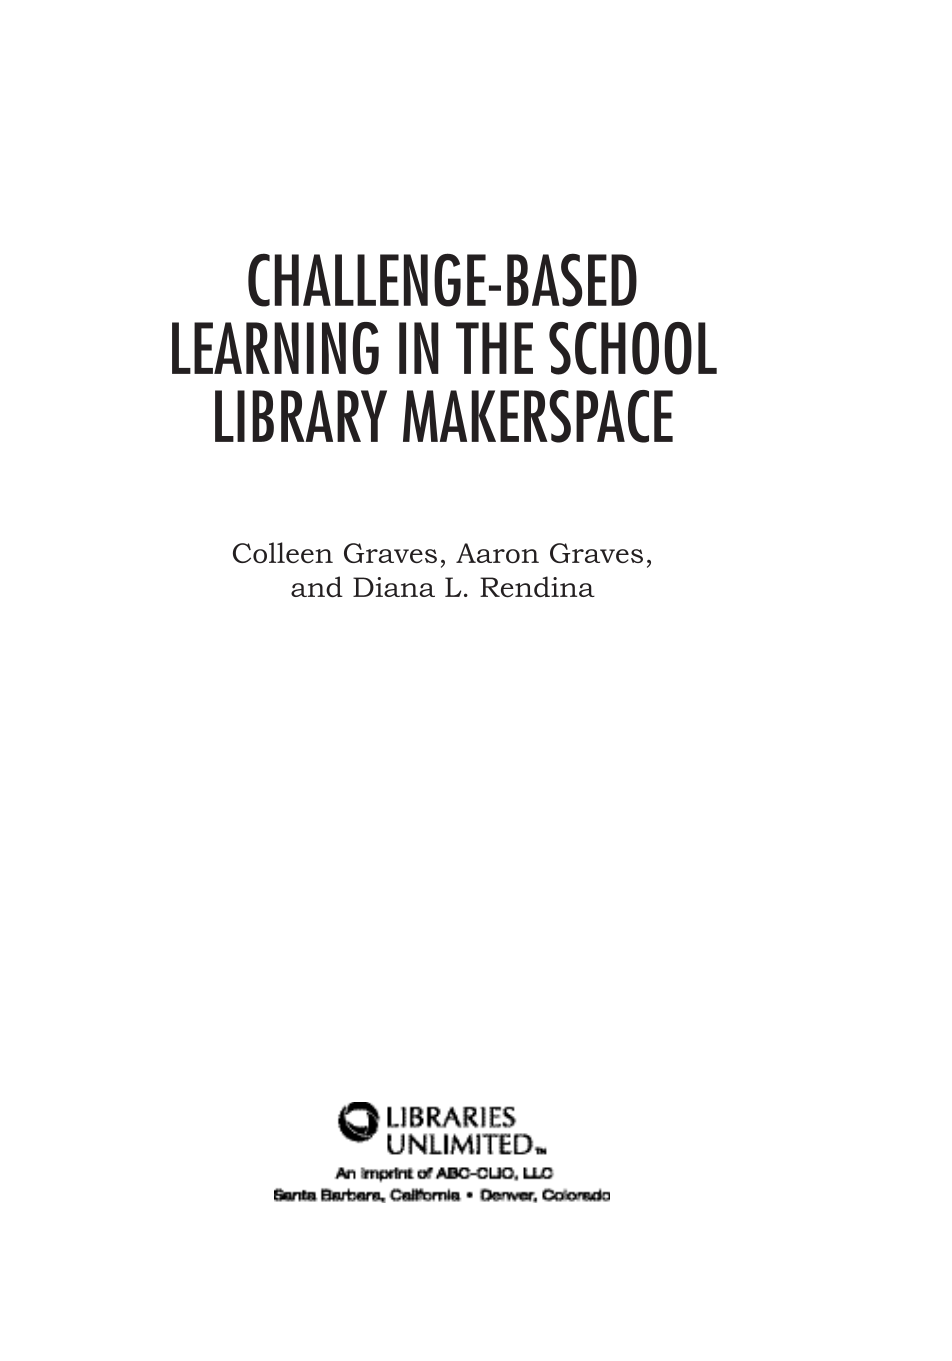 Challenge-Based Learning in the School Library Makerspace page i